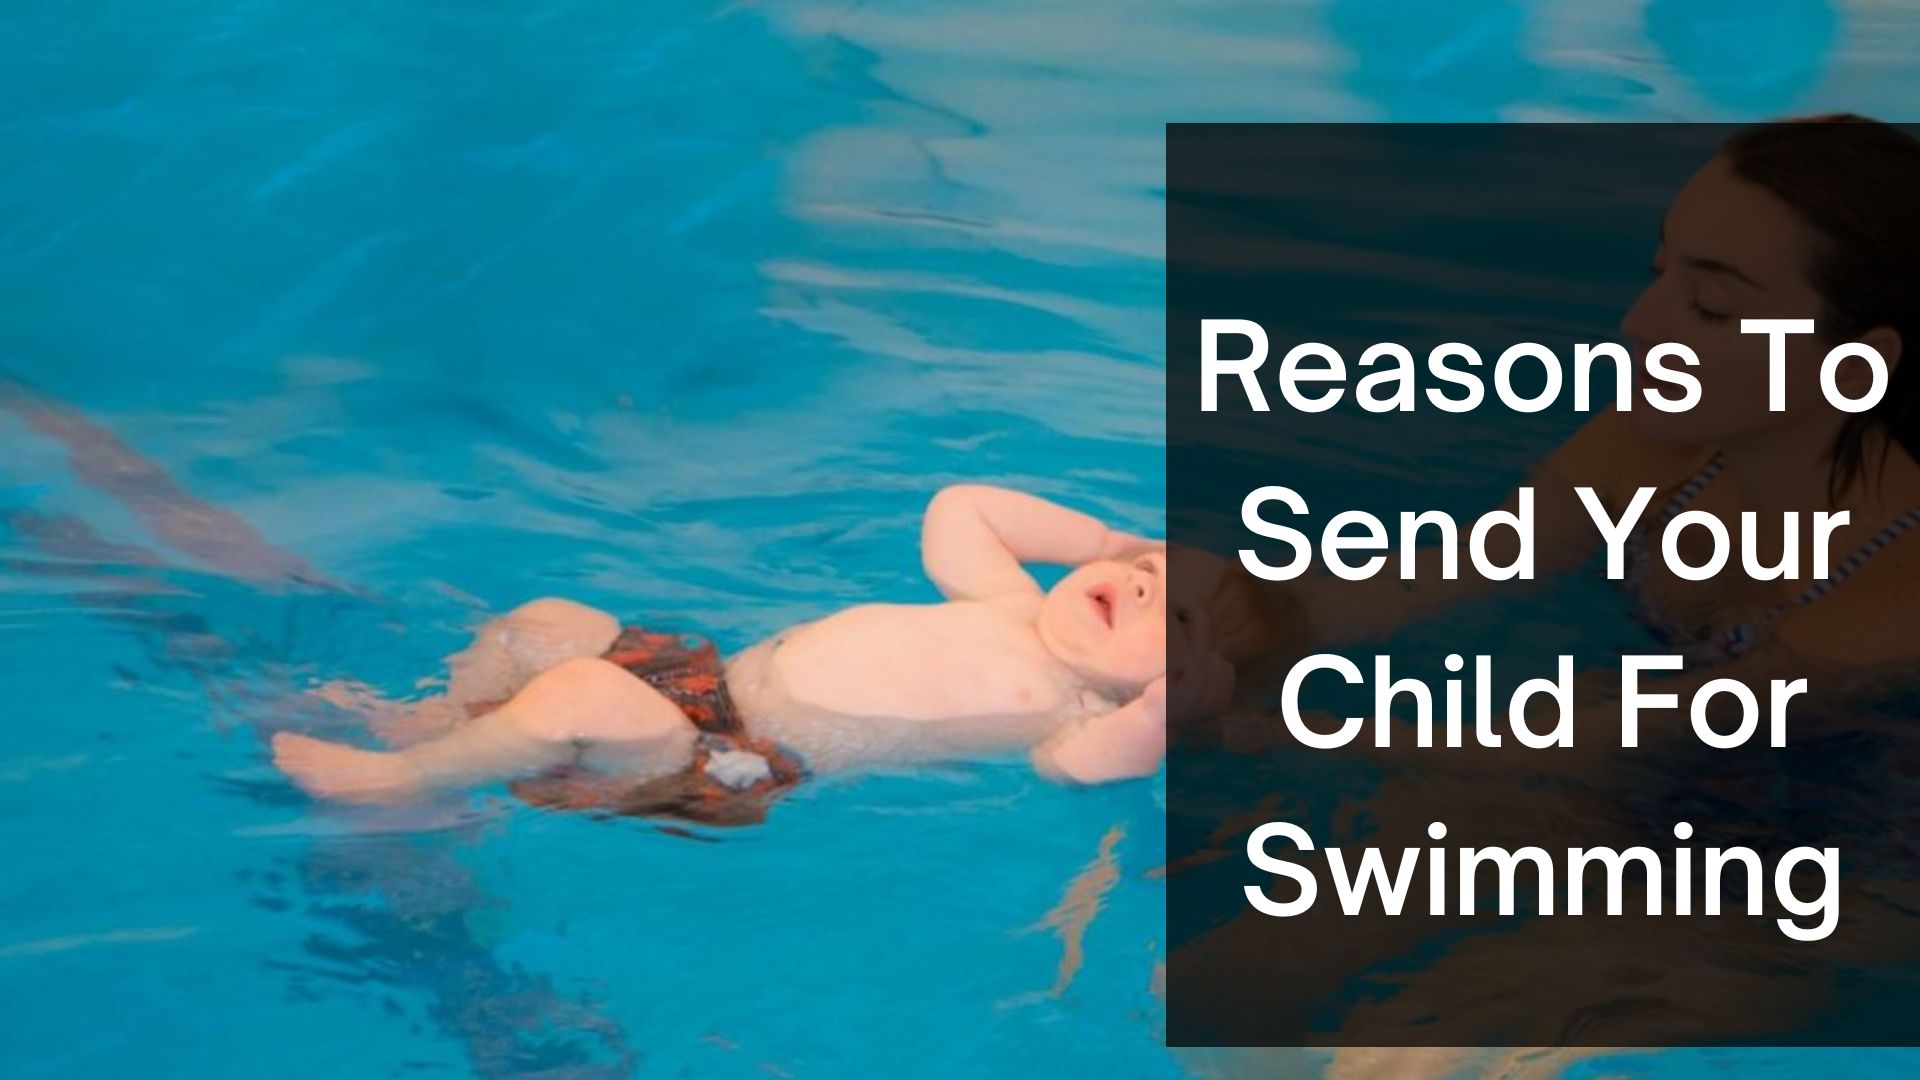 kids swimming lessons